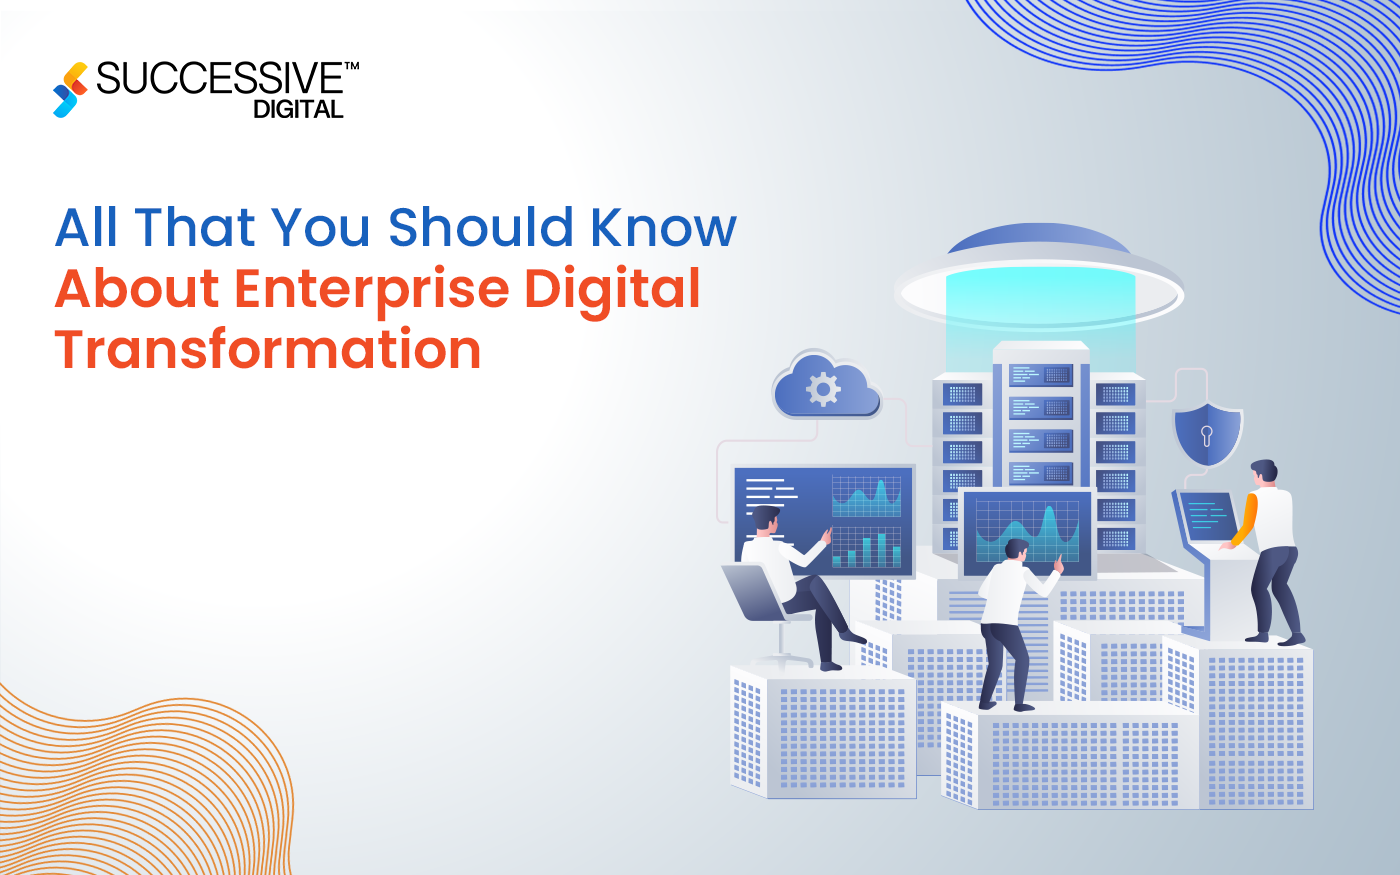 All That You Should Know About Enterprise Digital Transformation